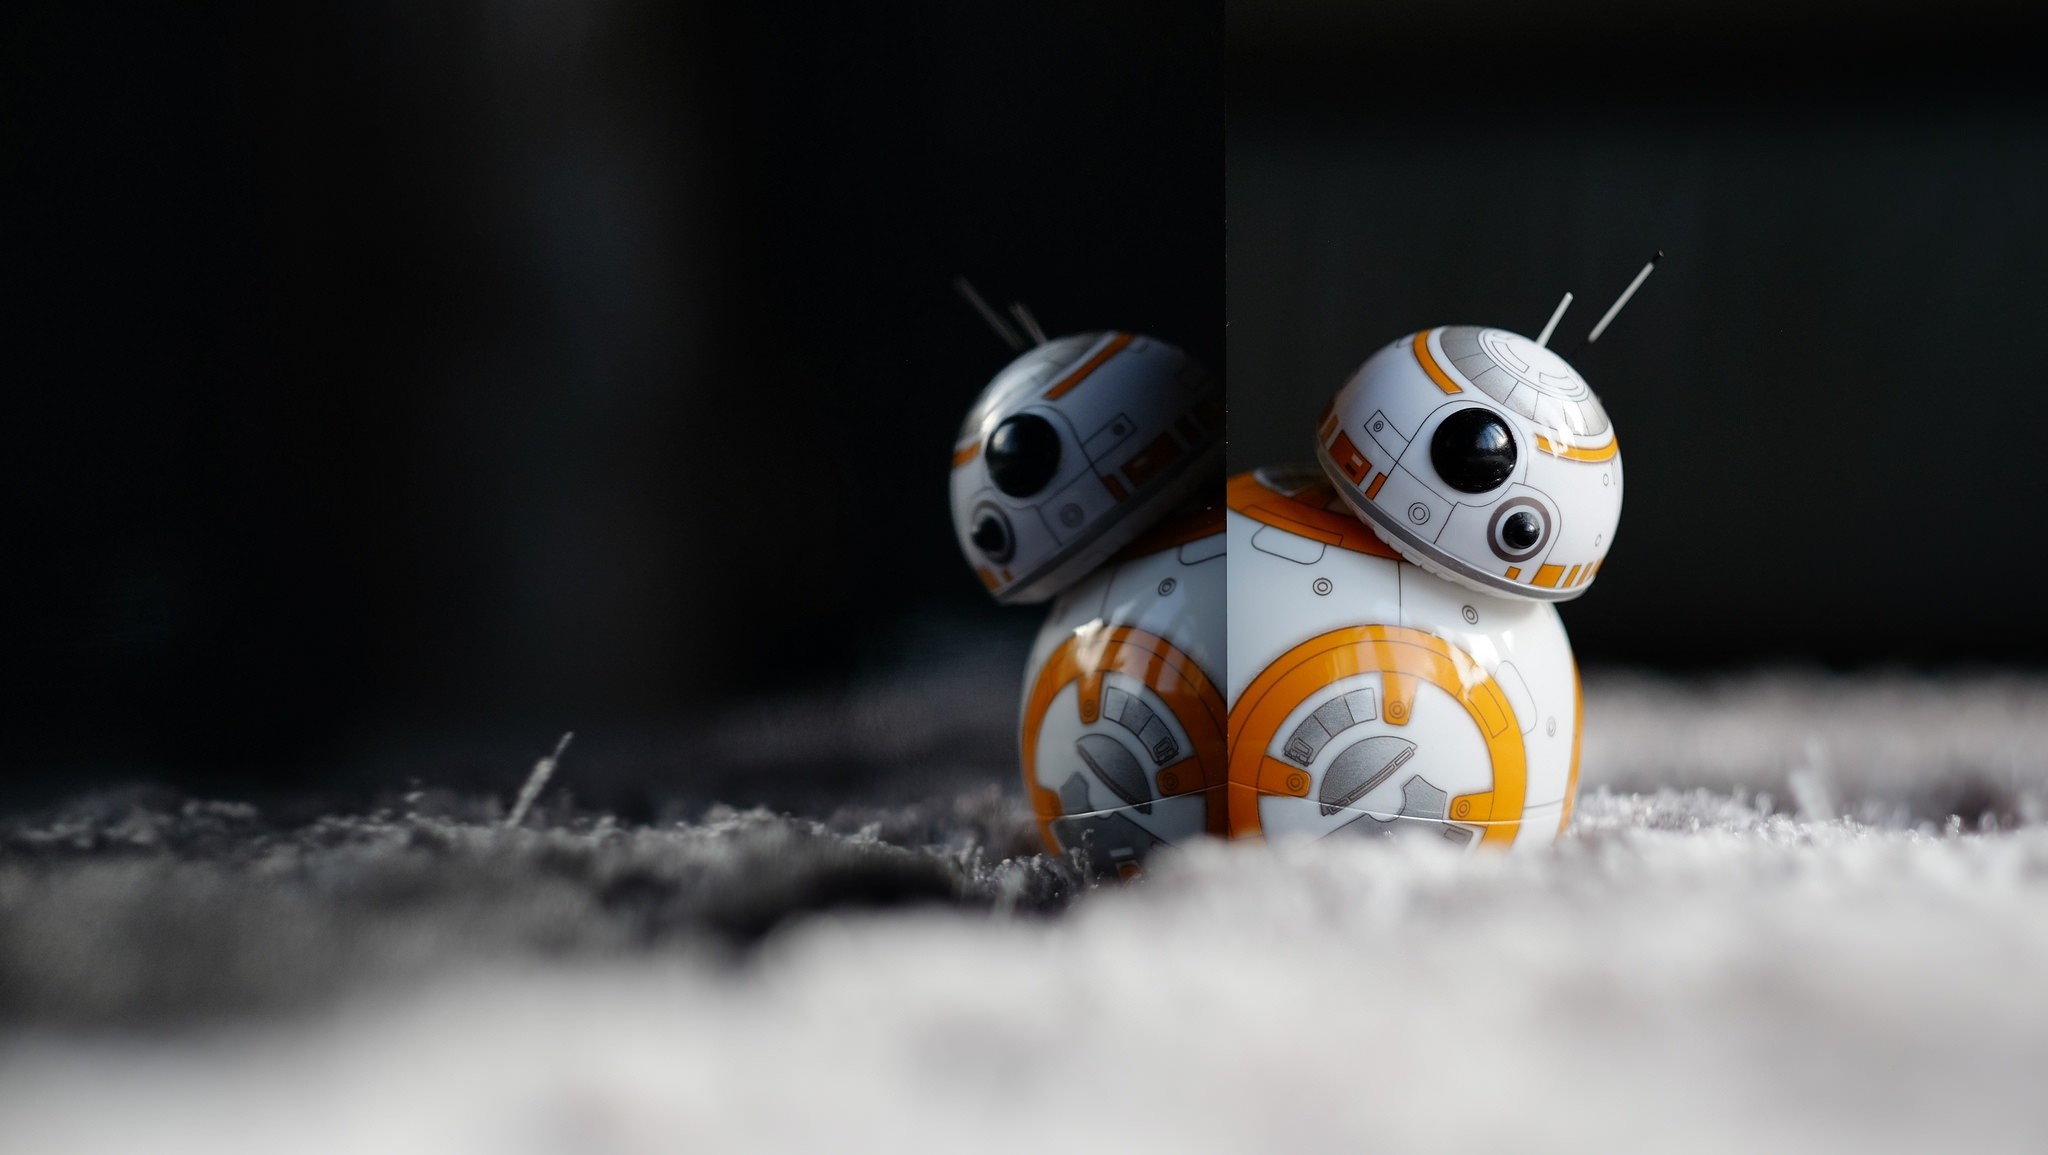 Man Made – Toy Reflection Star Wars BB-8 Droid Wallpaper